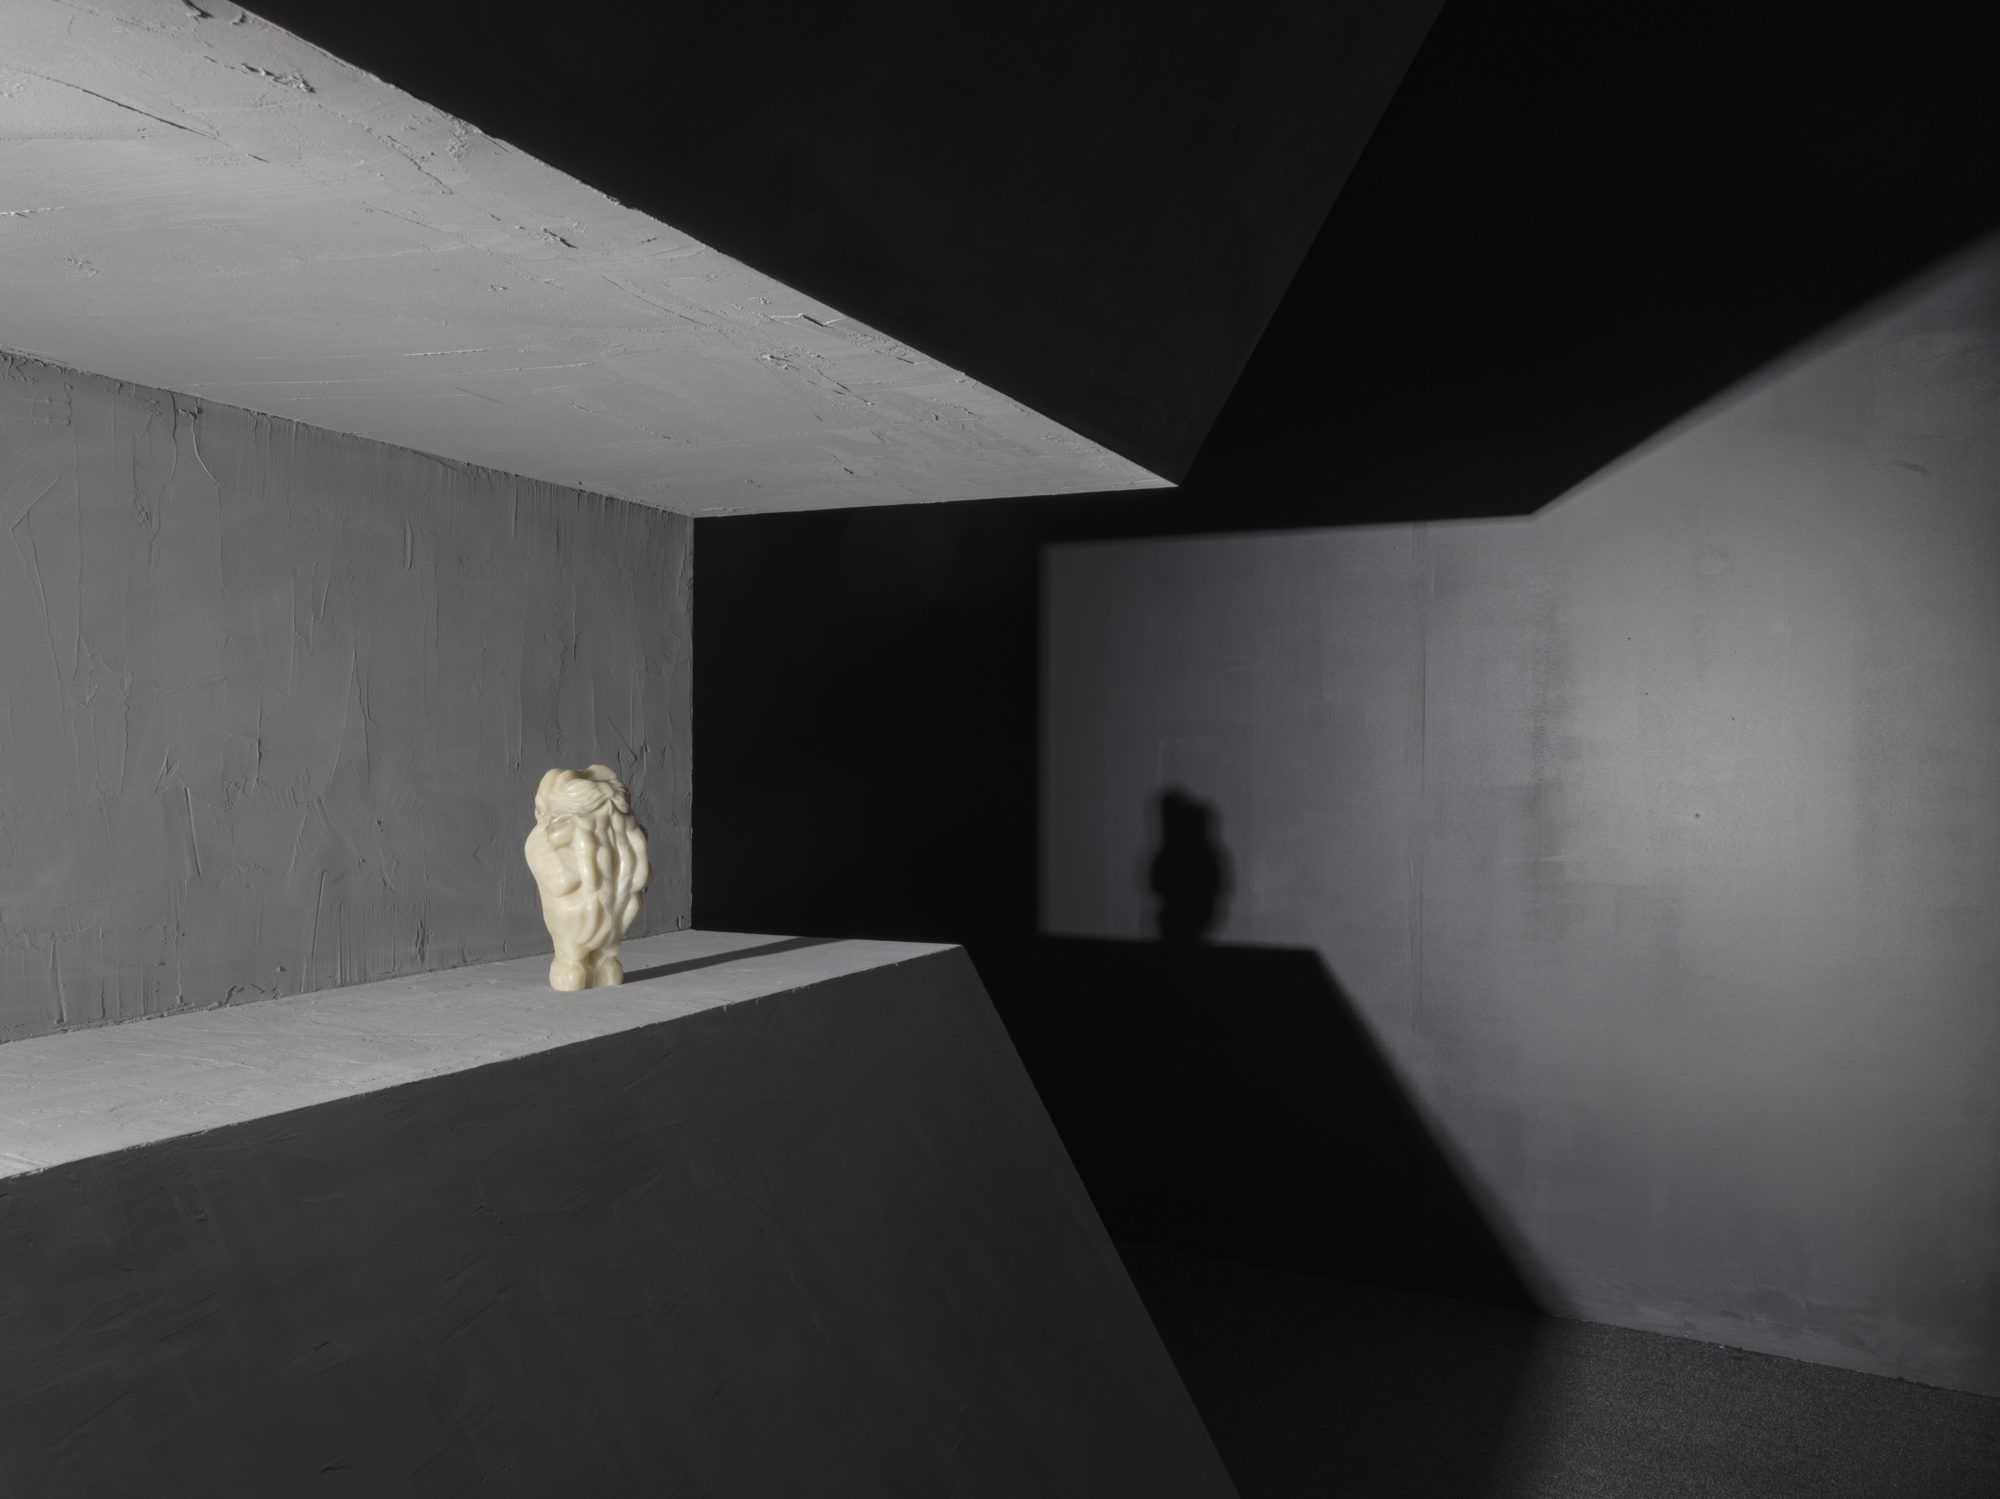 closeup view of small white figure greeting its shadow at the end of a carved gray space